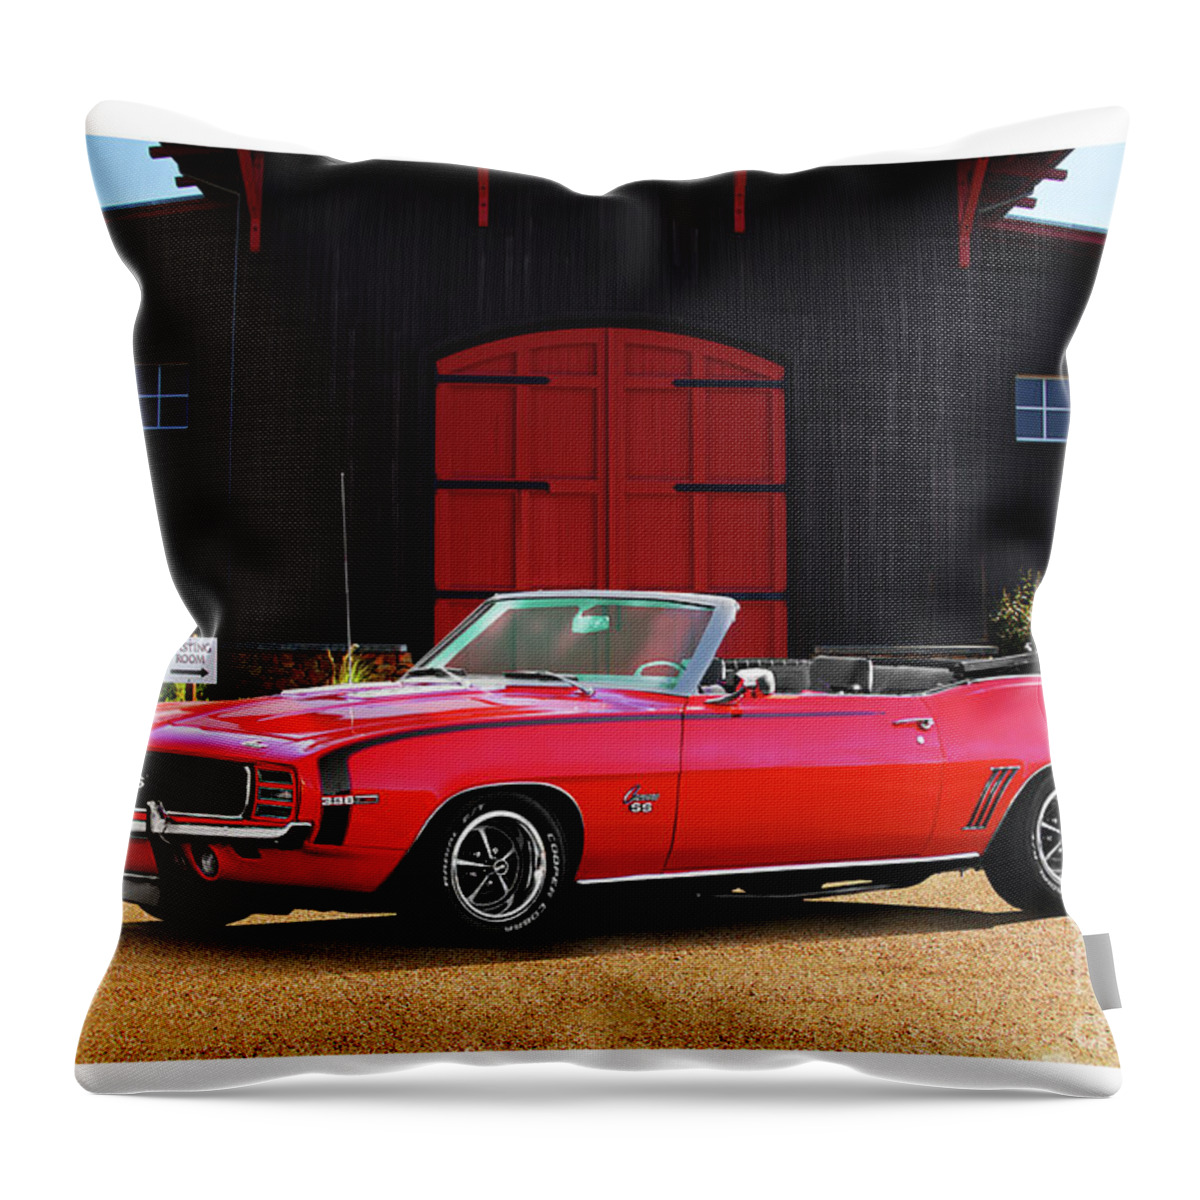 1969 Chevrolet Camaro Ss396 Throw Pillow featuring the photograph 1969 Camaro SS396 Convertible by Dave Koontz